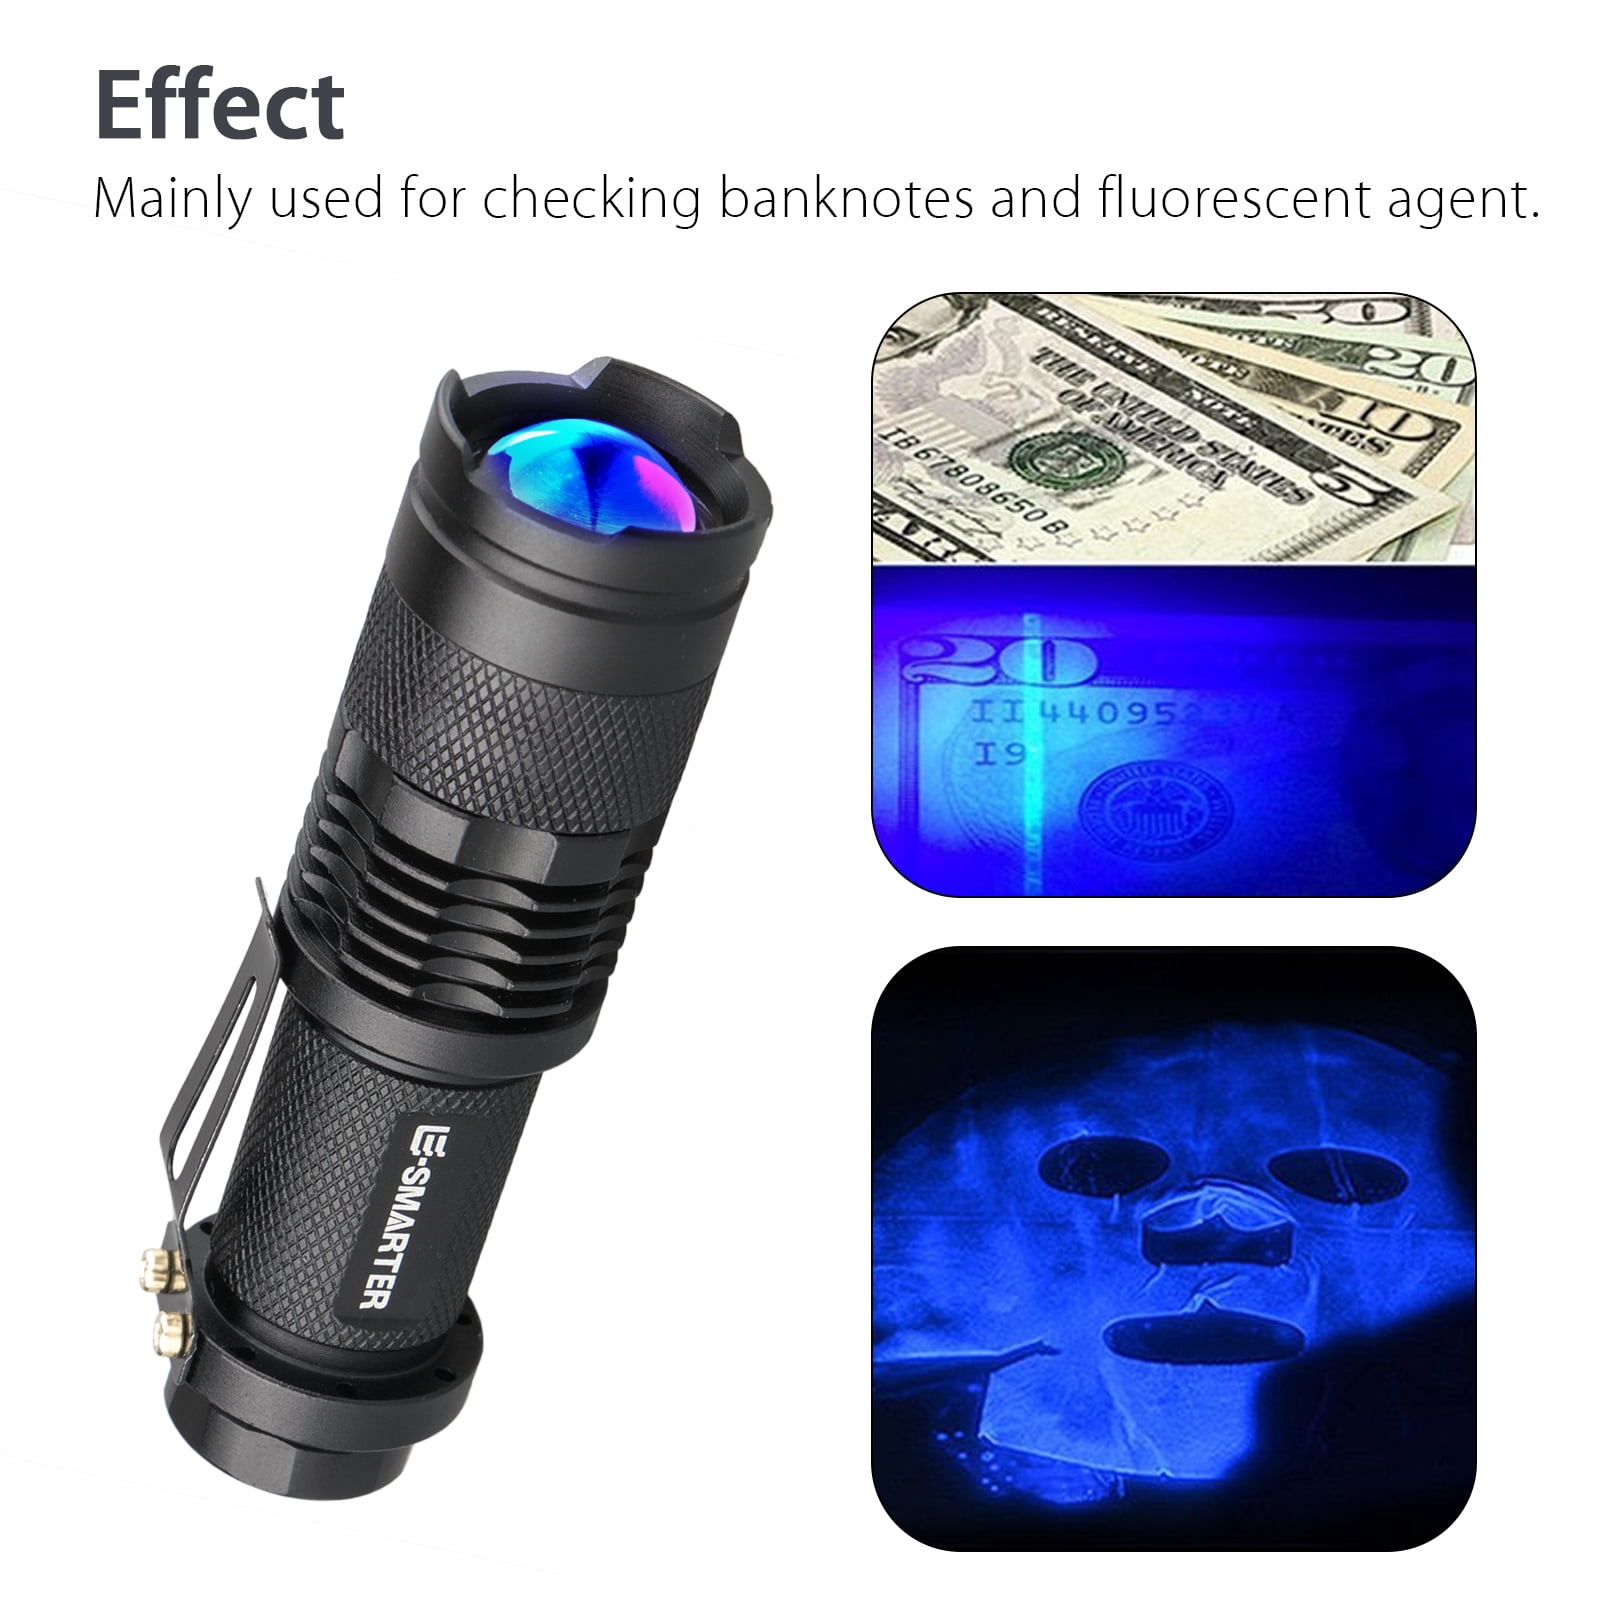 UV Flashlight Black Light Foooxmart 100 LED Ultraviolet Blacklight Flashlights Detector for Dog/Cat Urine & Stain Detection,Hunting Scorpions,Search for Bed Bugs and Fluorescer 